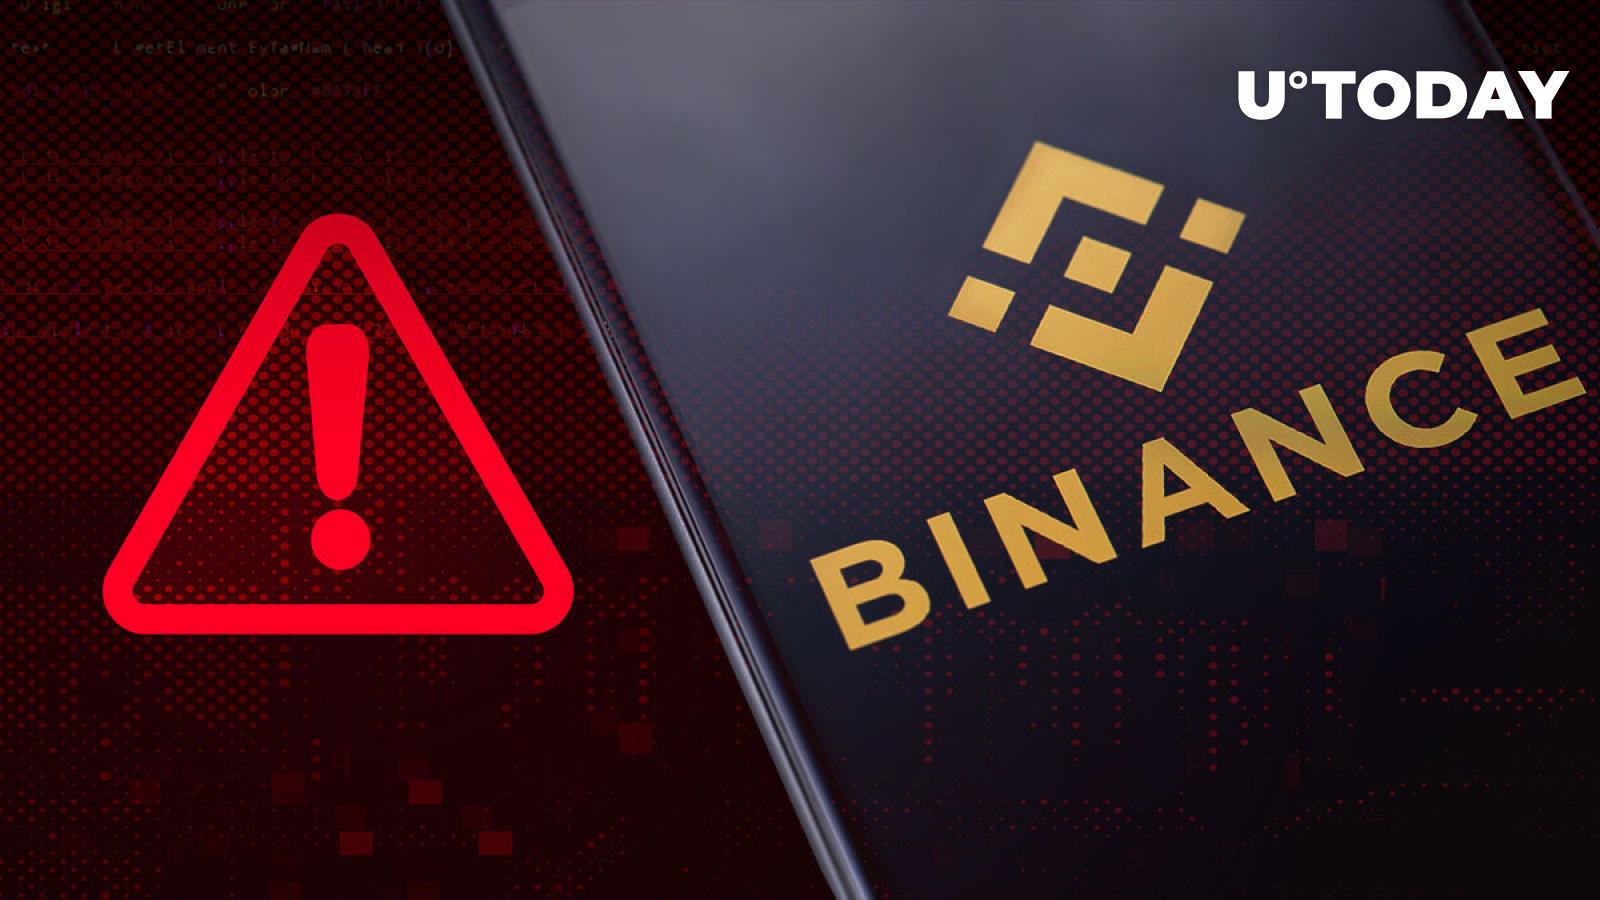 Hack Alert: Binance’s API Compromised, Here’s What You Need to Do